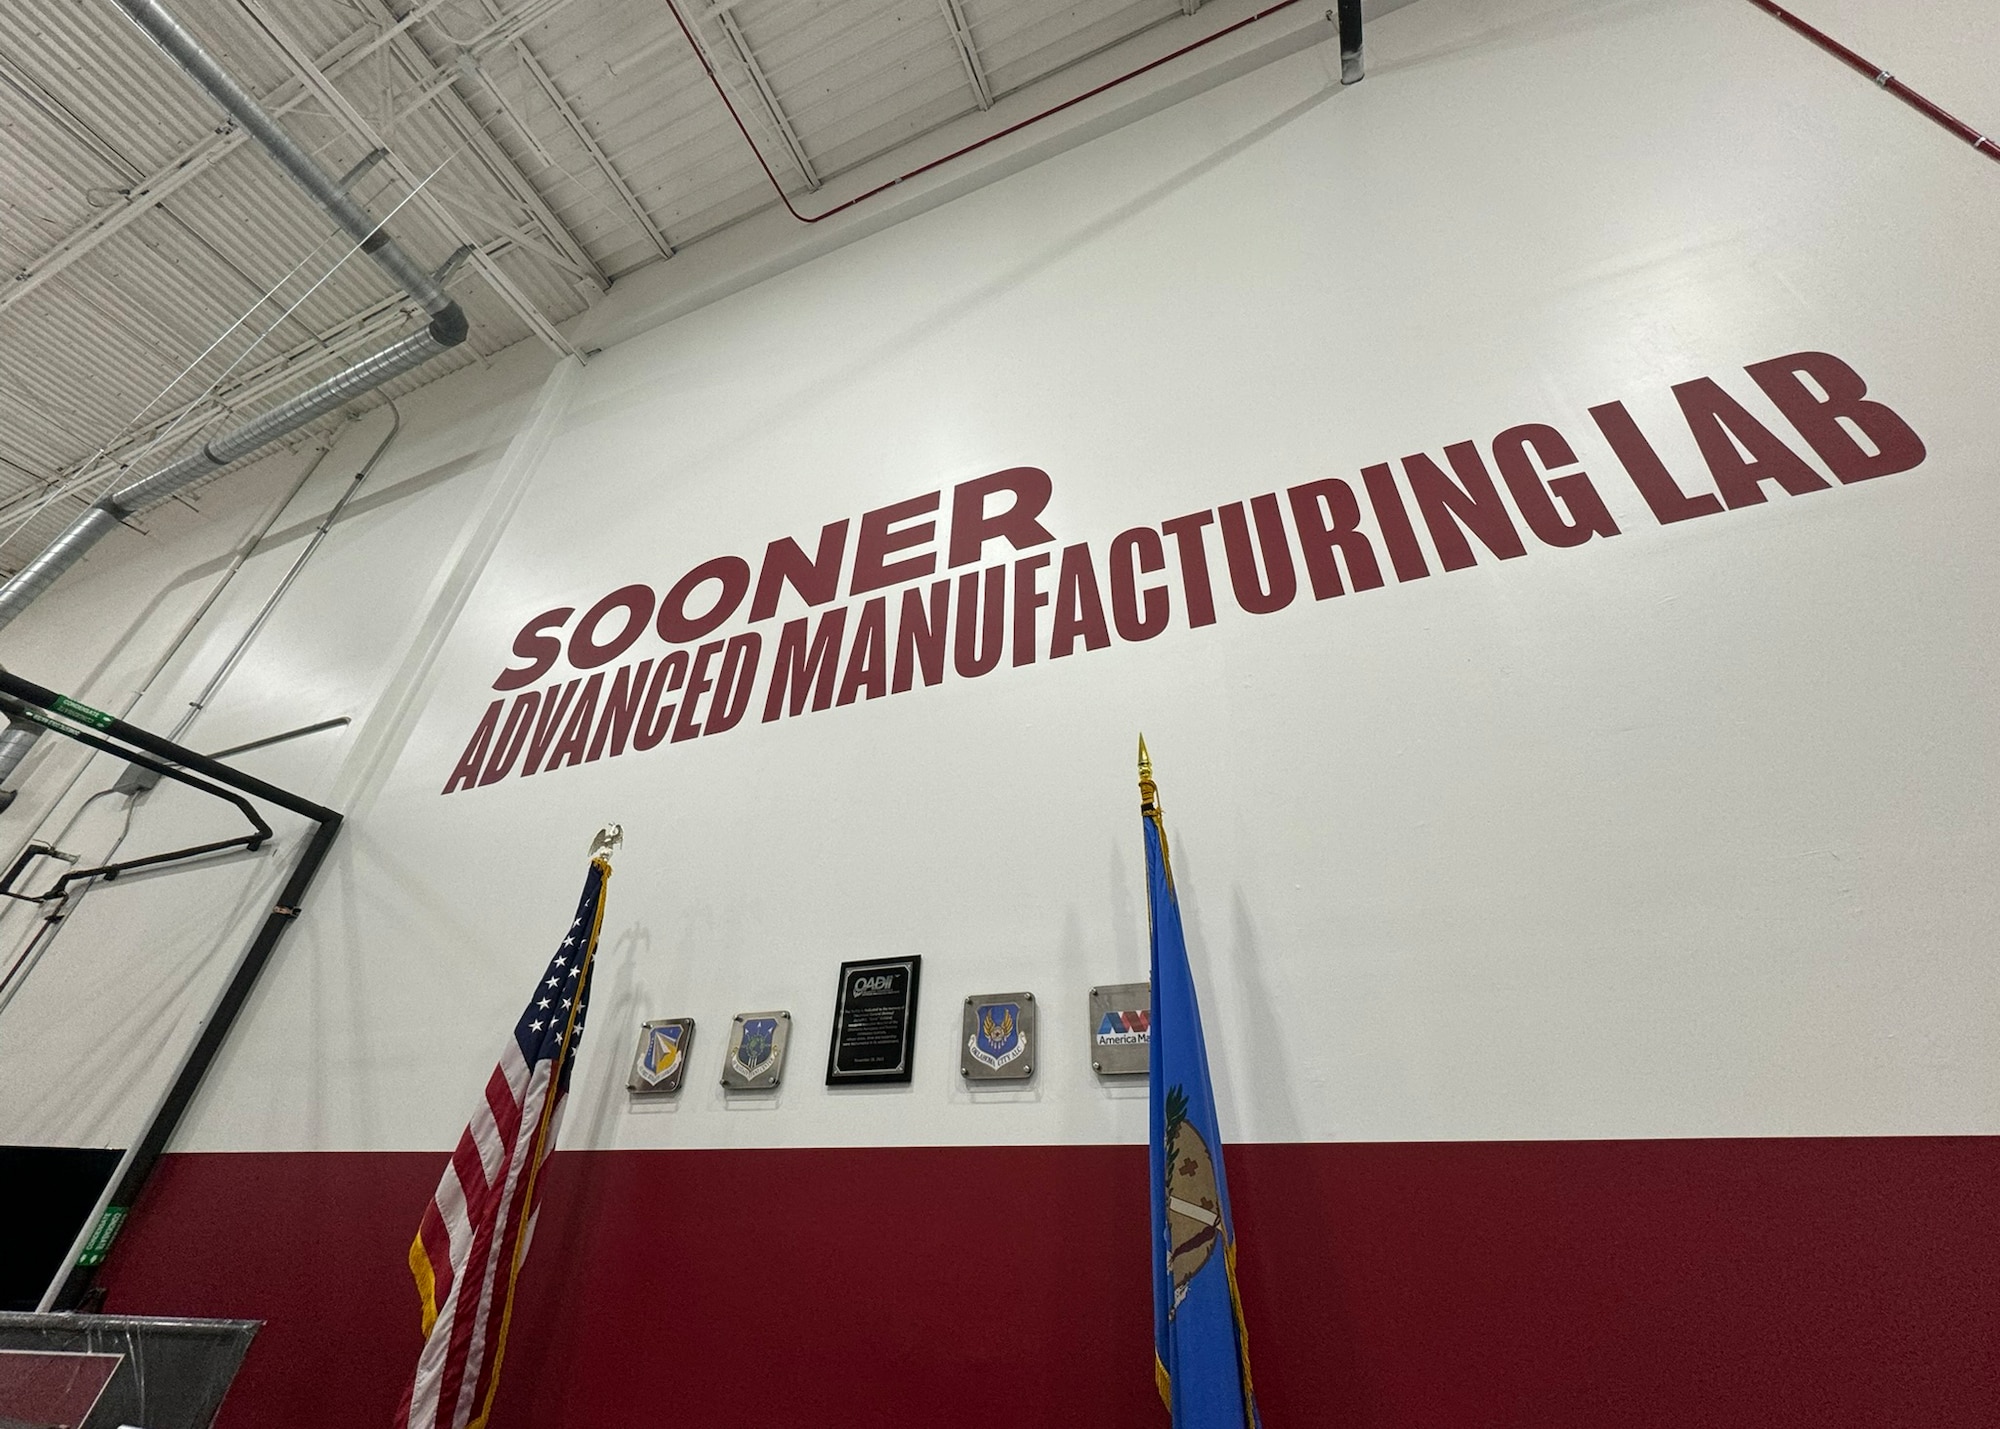 The University of Oklahoma officially opened the Sooner Advanced Manufacturing Lab during a grand opening event attended by government, military and defense industry leaders held Nov. 28.